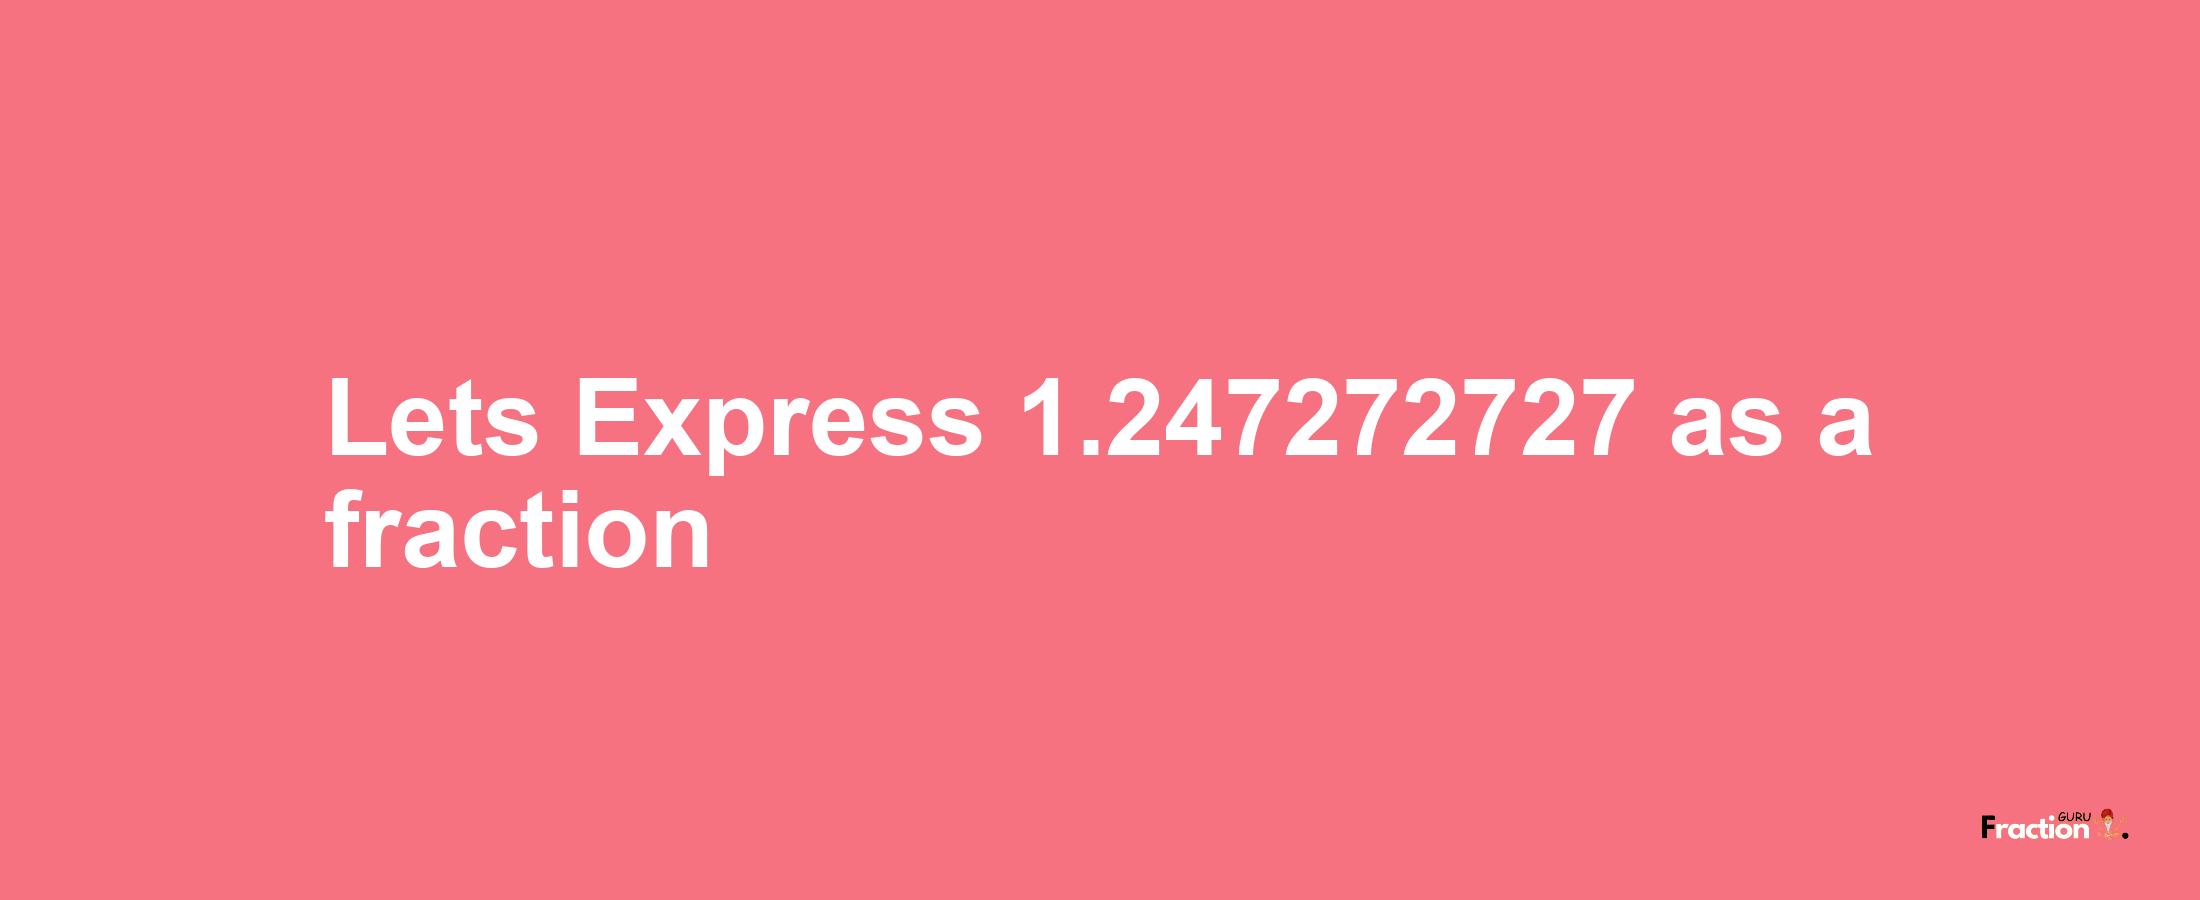 Lets Express 1.247272727 as afraction